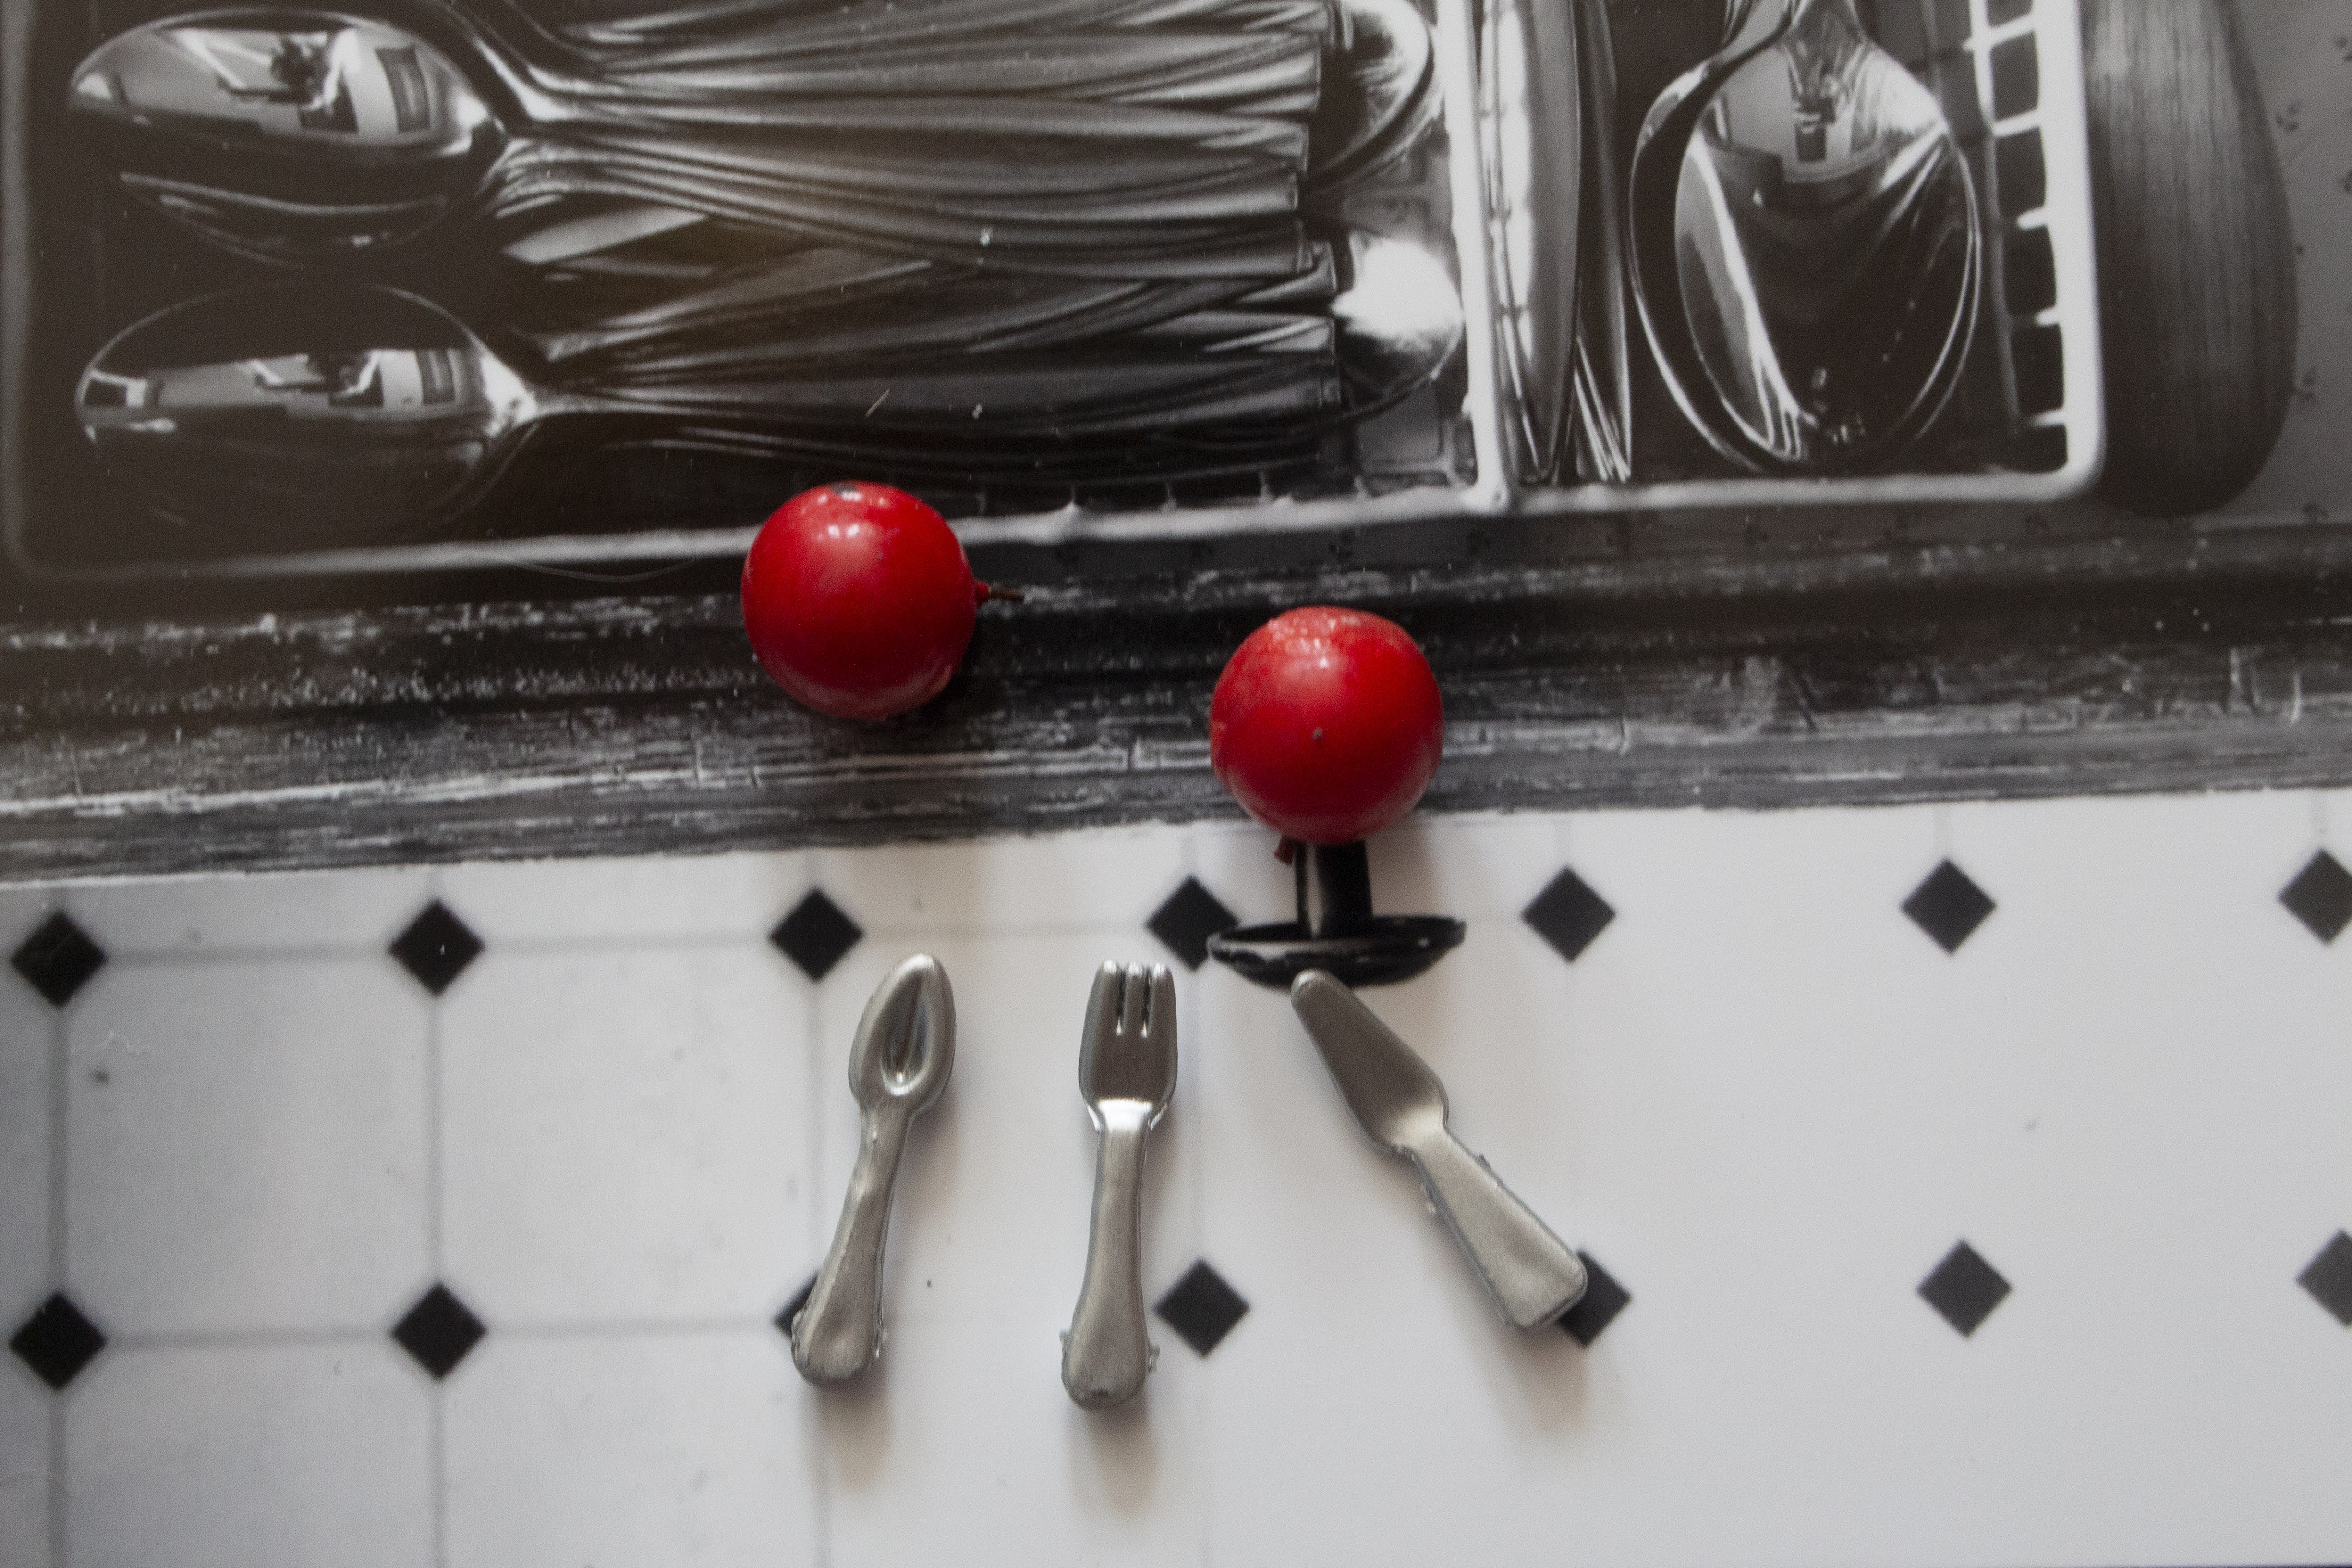 Miniature silverwear and apples float above a background of a halfway open silverwear drawer and a tiled linoleum floor